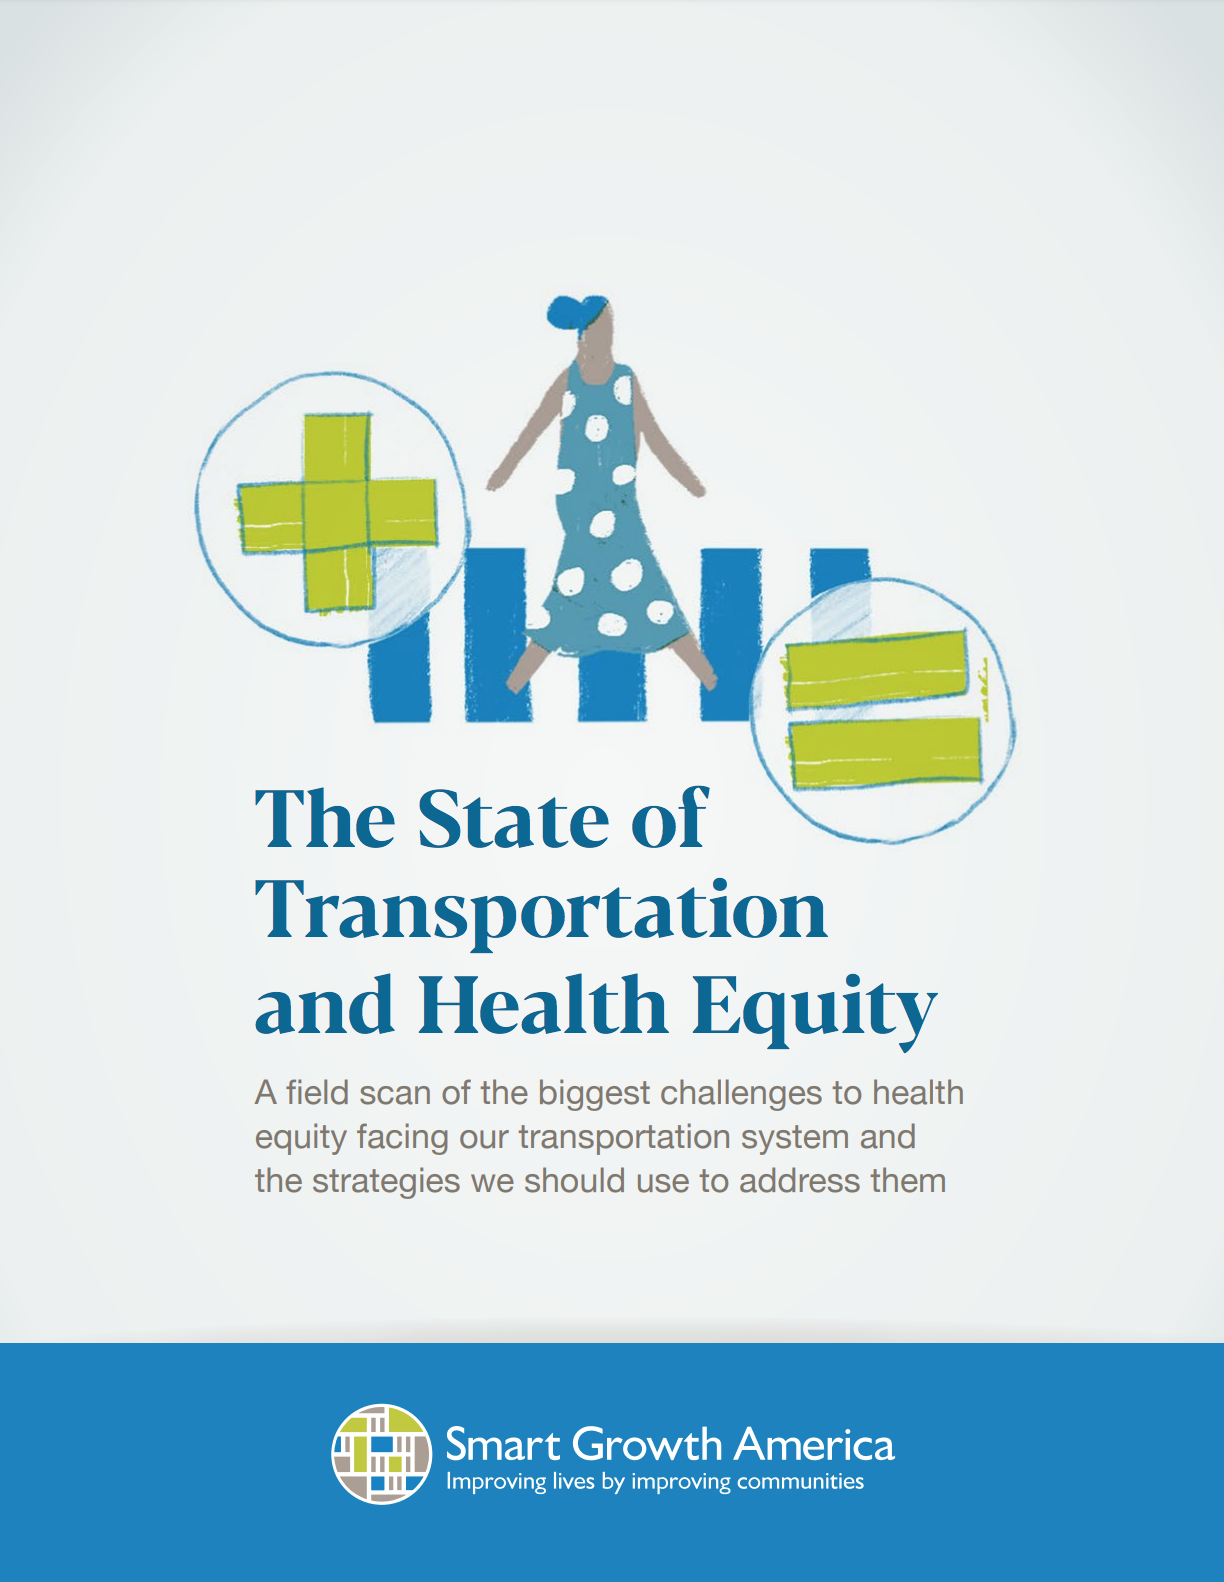 The State of Transportation and Health Equity